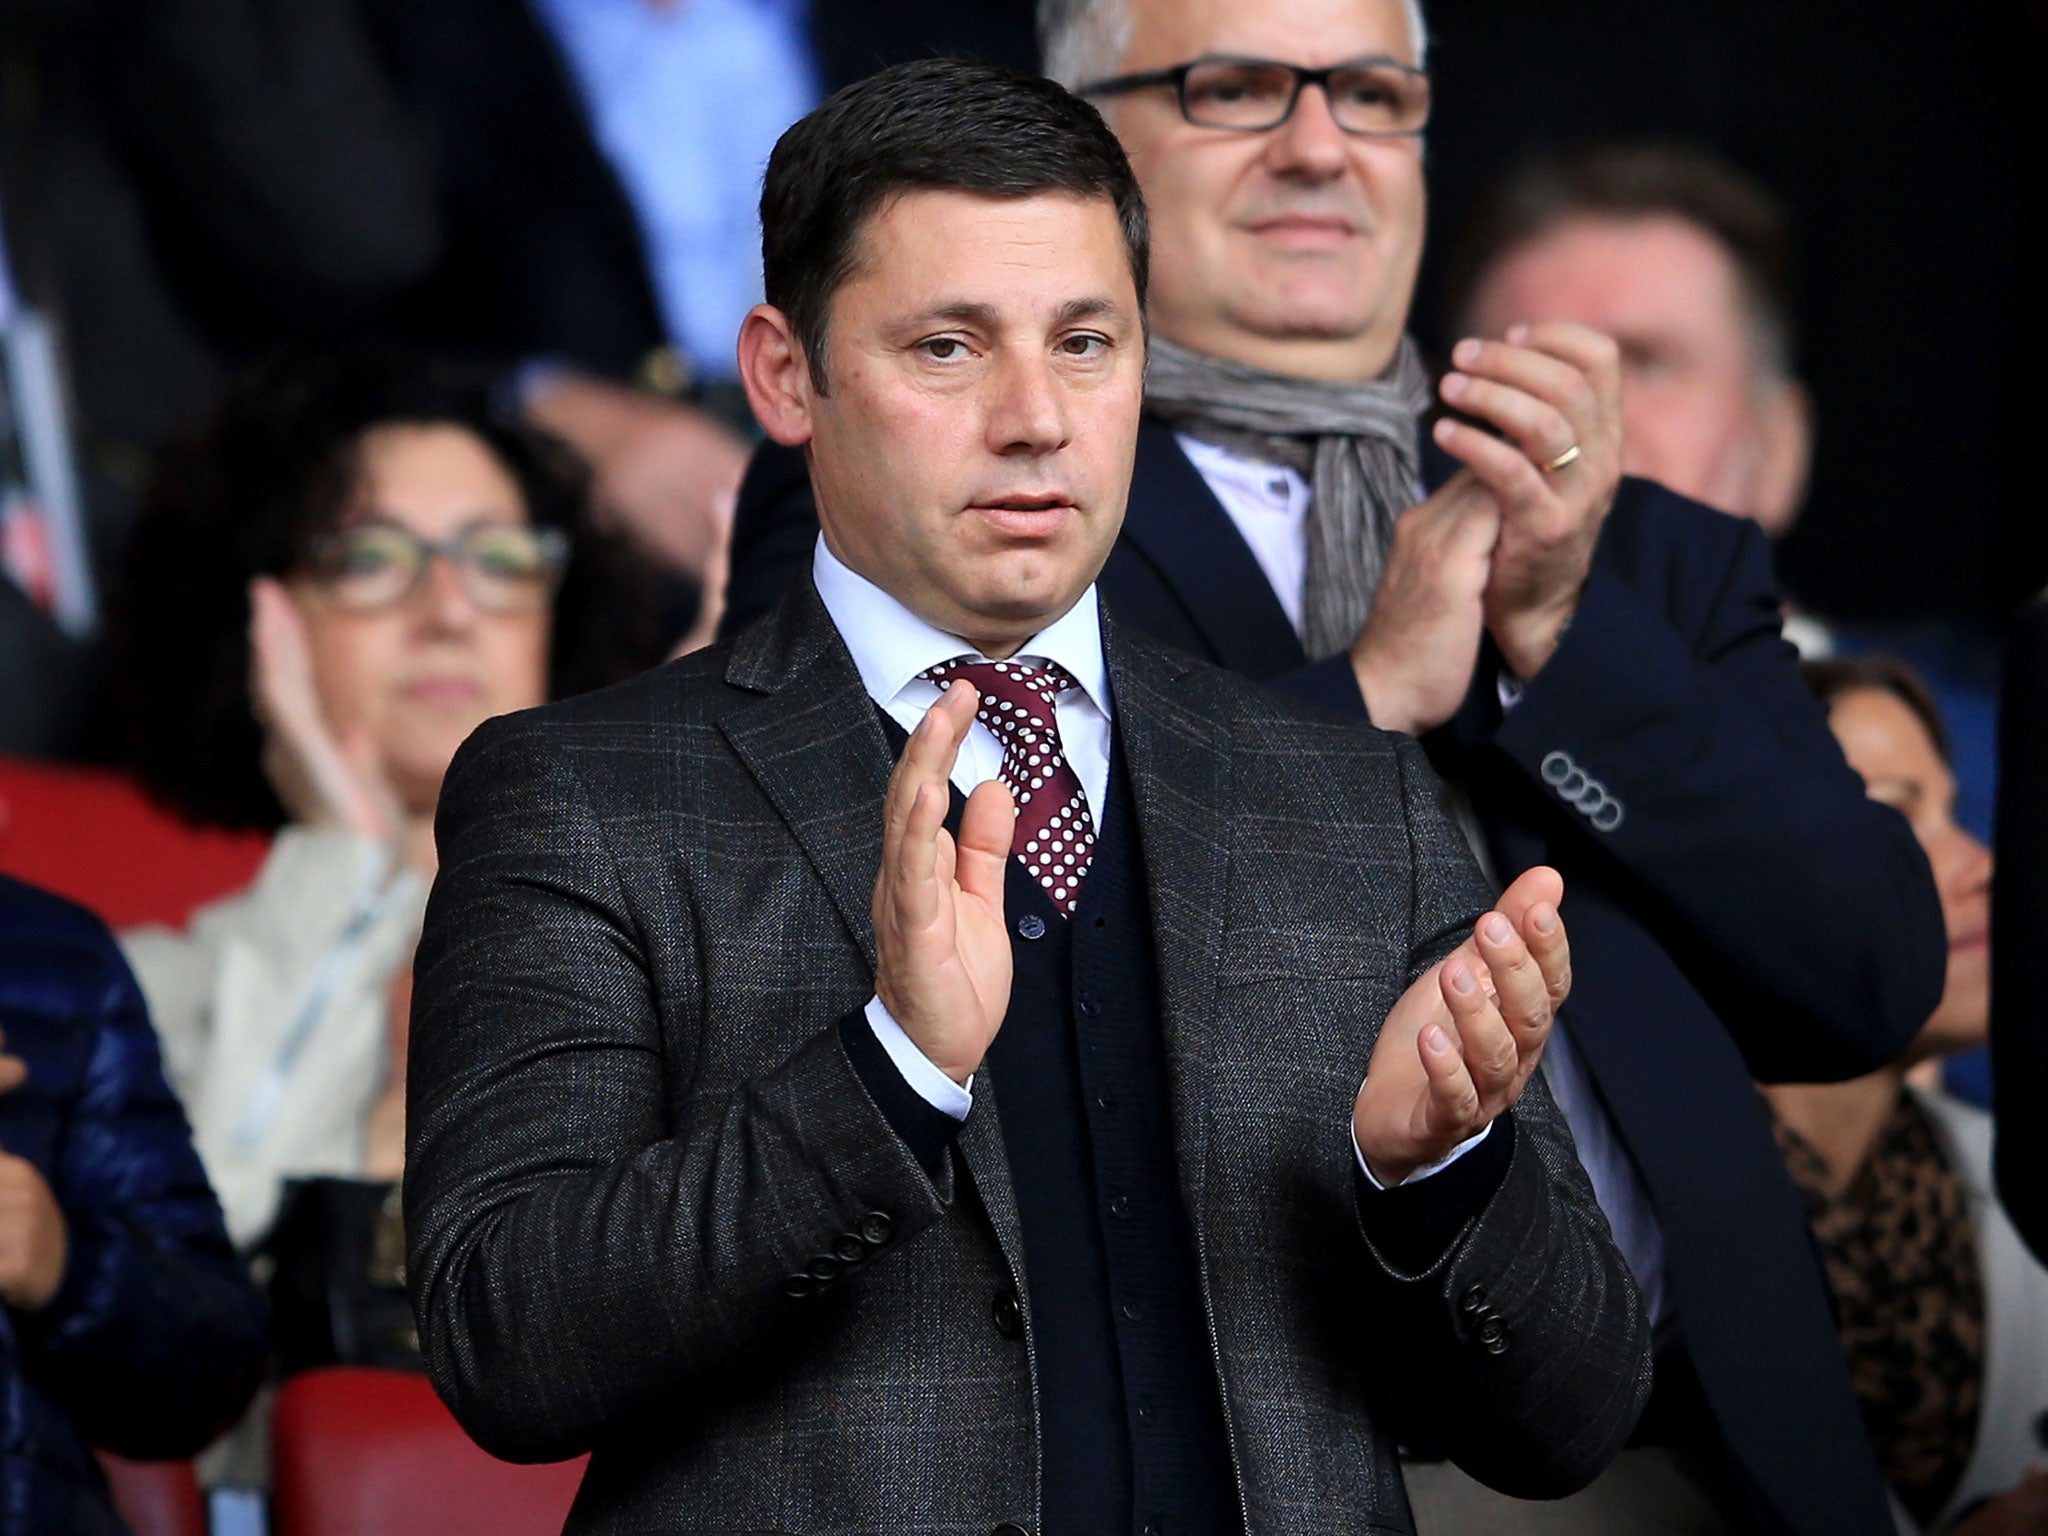 Southampton chairman Nicola Cortese has quit his role with the club over a row with the owner Katharina Liebherr